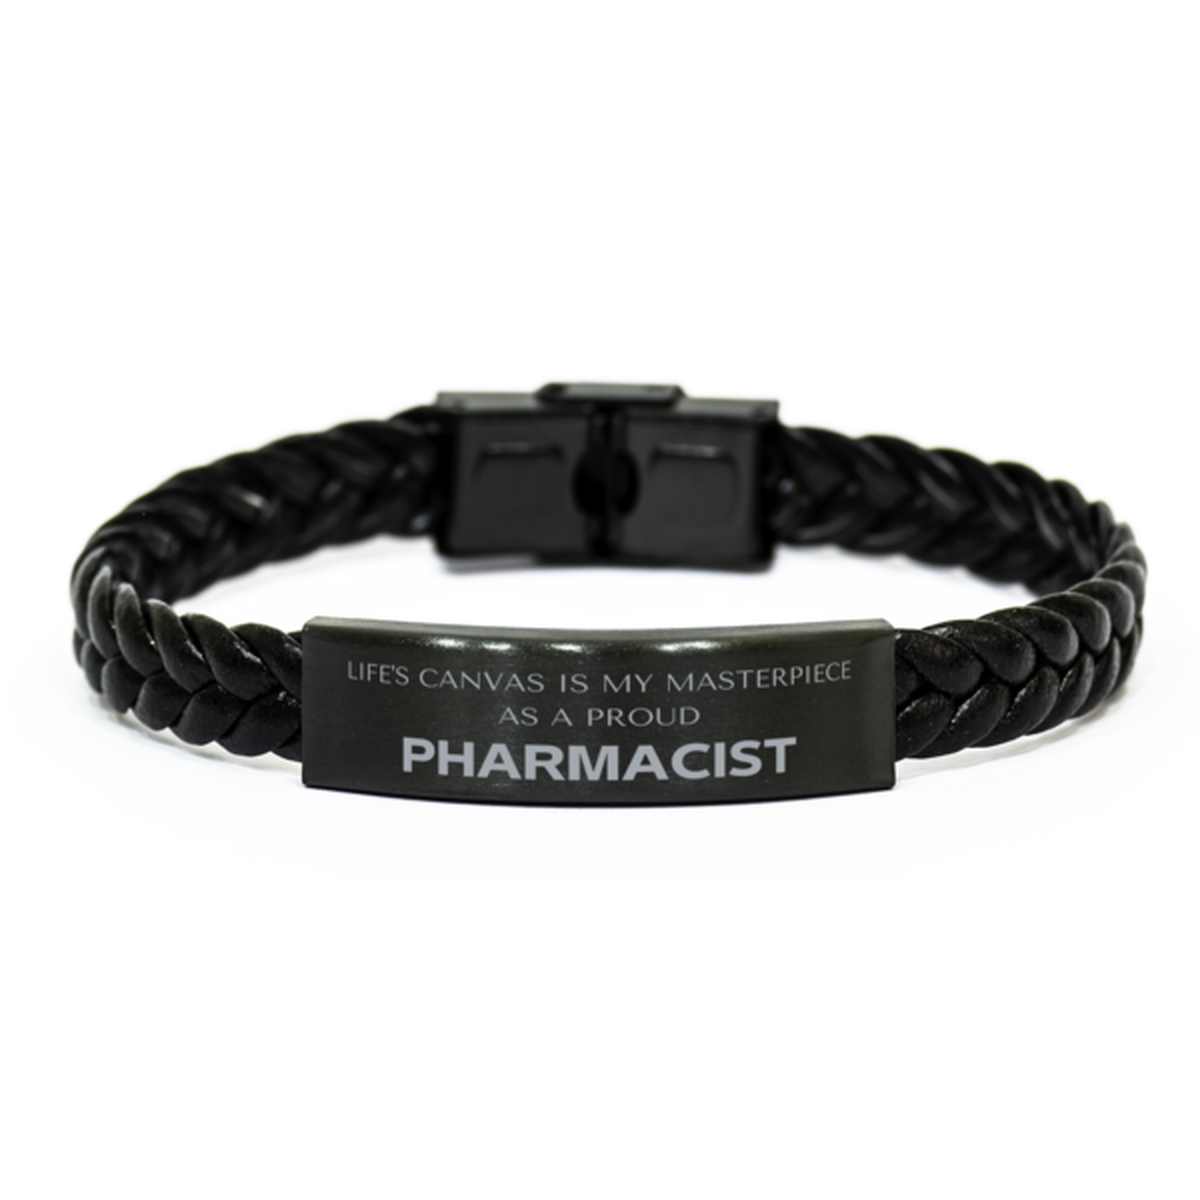 Proud Pharmacist Gifts, Life's canvas is my masterpiece, Epic Birthday Christmas Unique Braided Leather Bracelet For Pharmacist, Coworkers, Men, Women, Friends